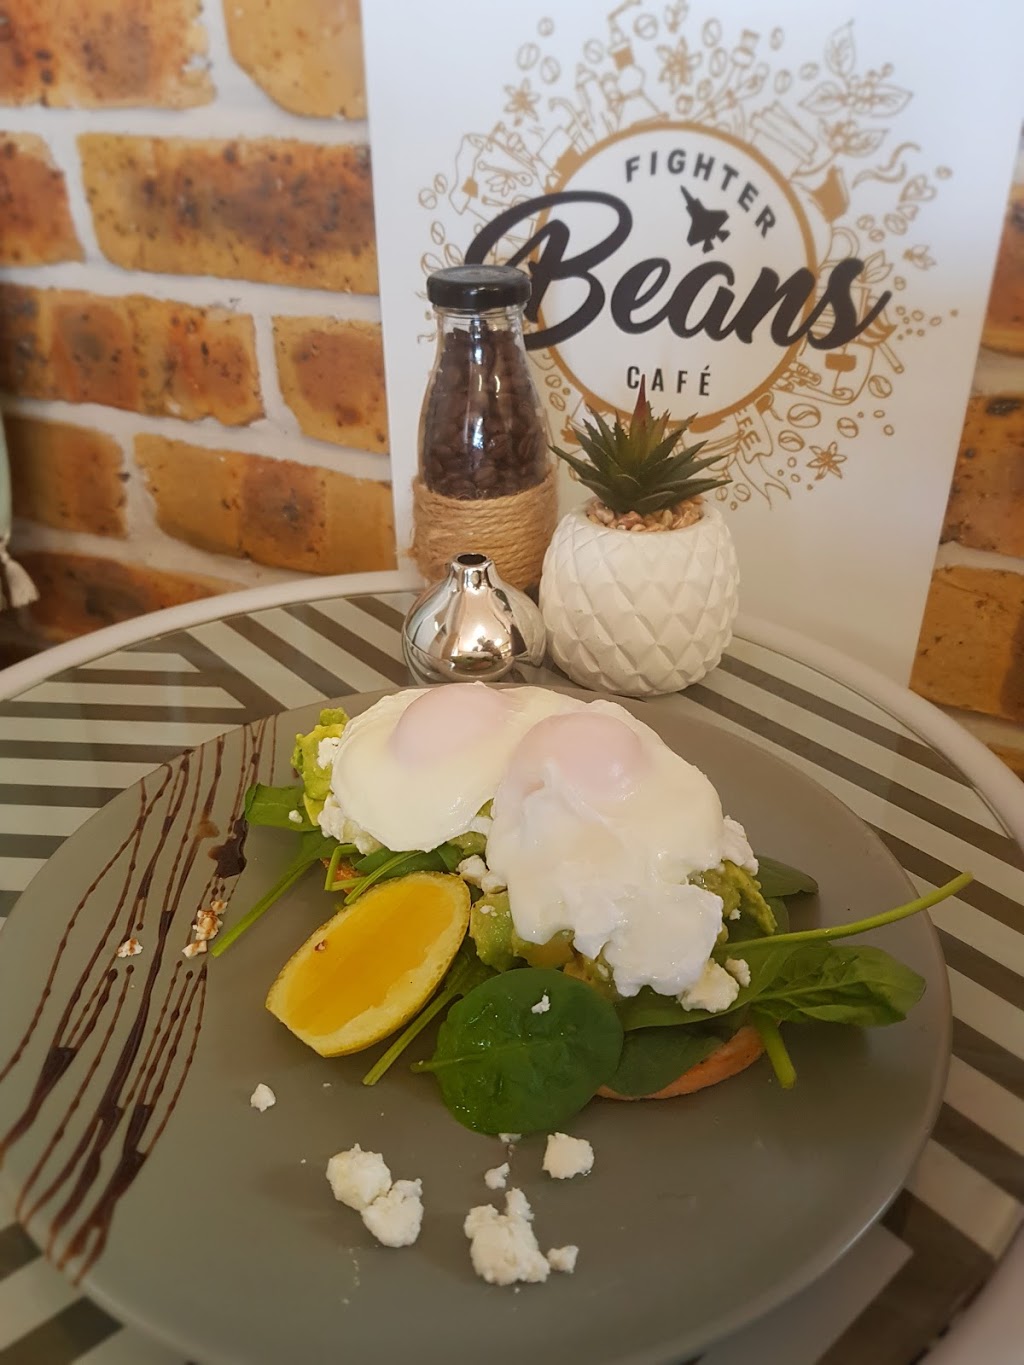 Fighter Beans Cafe | 49 Medowie Rd, Williamtown NSW 2314, Australia | Phone: (02) 4965 0992